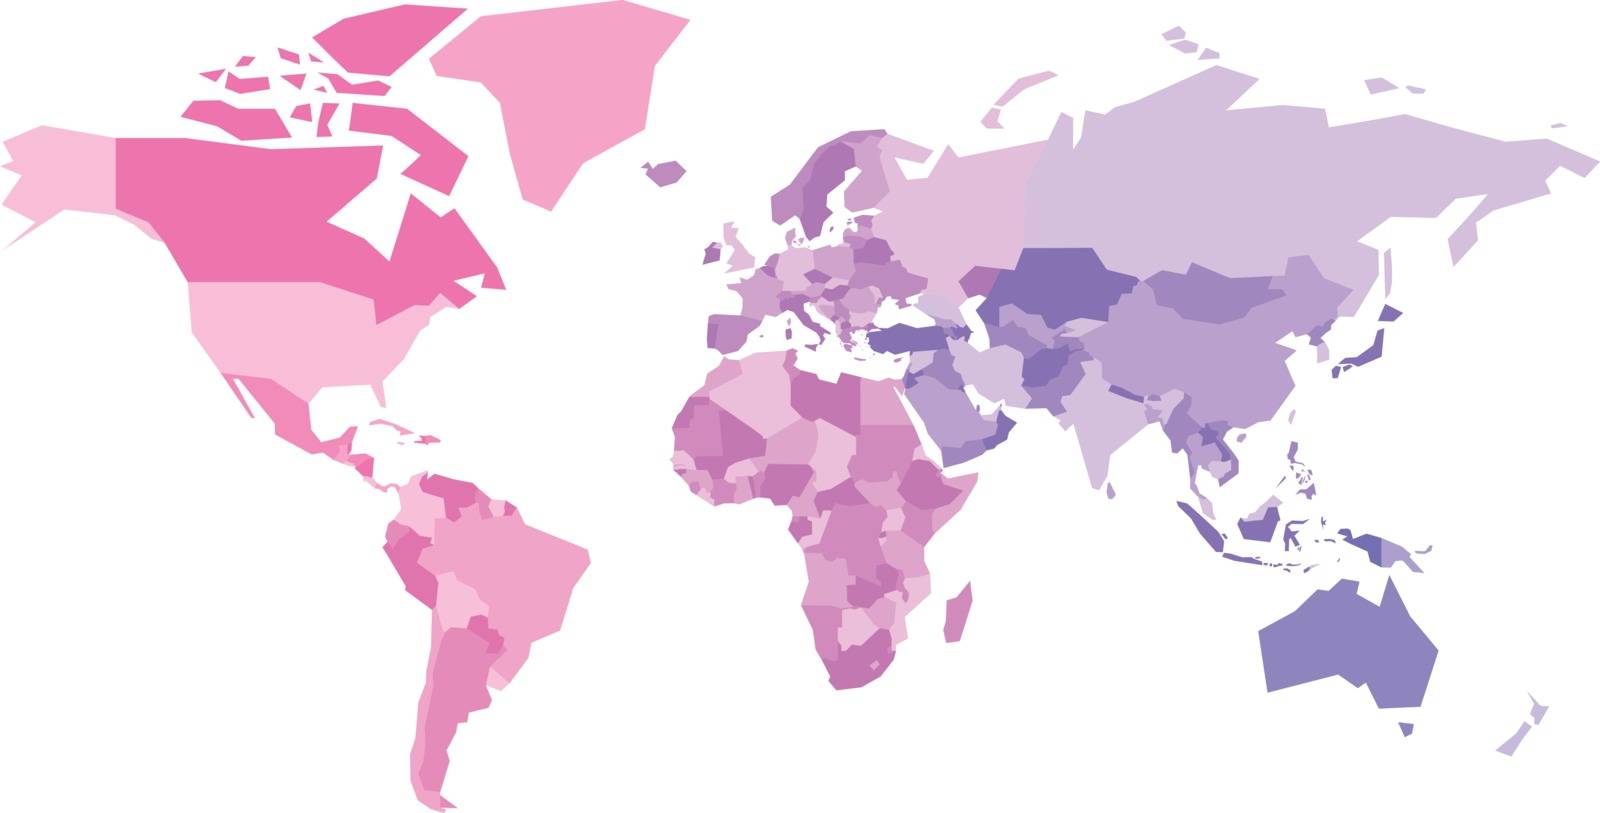 Multicolored map of World. Simplified political map with national borders of countires. Colorful vector illustration in pink-violet spectrum colors by pyty